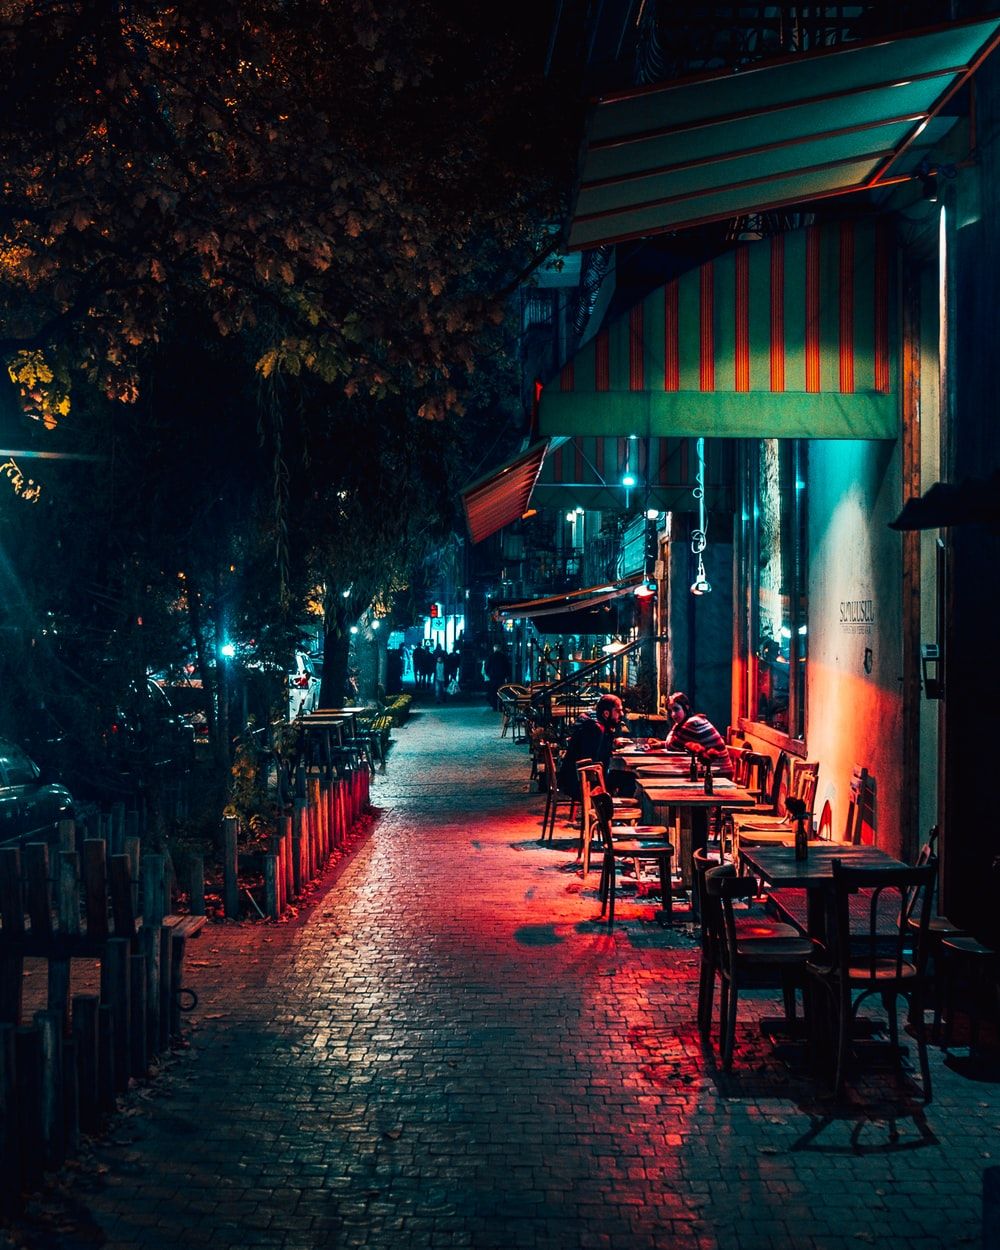 Night Cafe Wallpaper Free Night Cafe Background